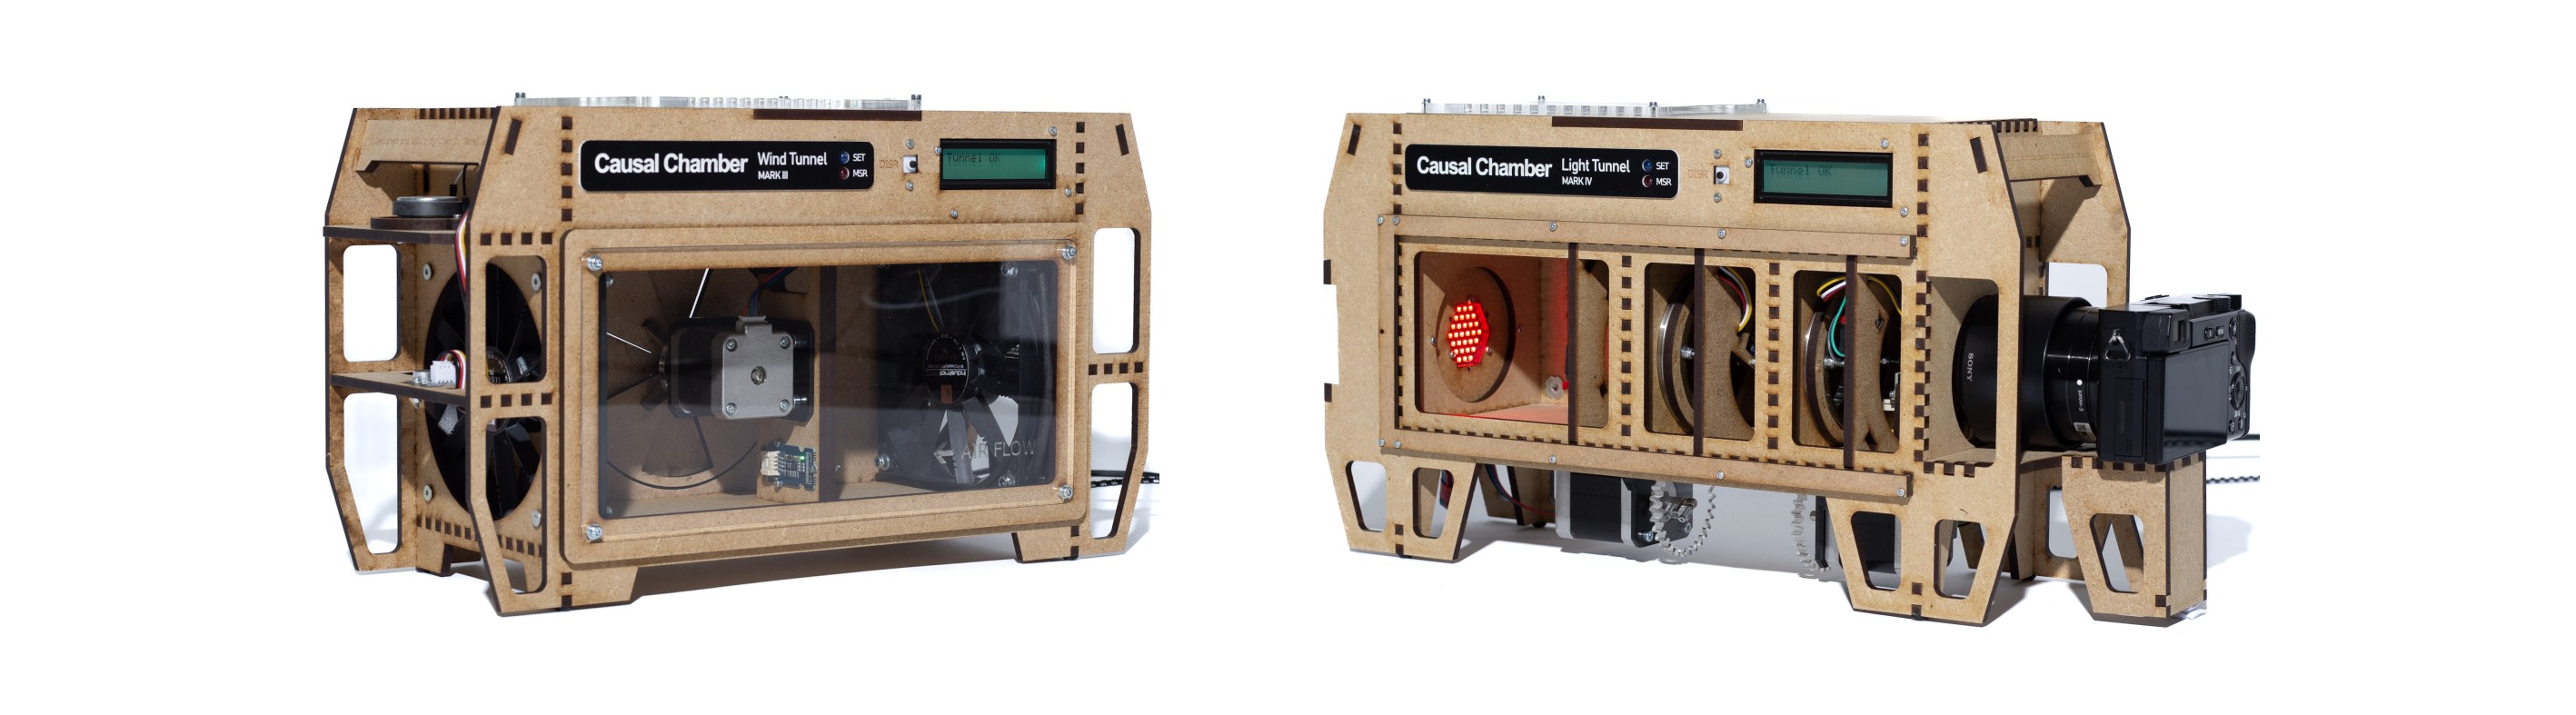 The Causal Chambers: (left) the wind tunnel, and (right) the light tunnel with the front panel removed to show its interior.